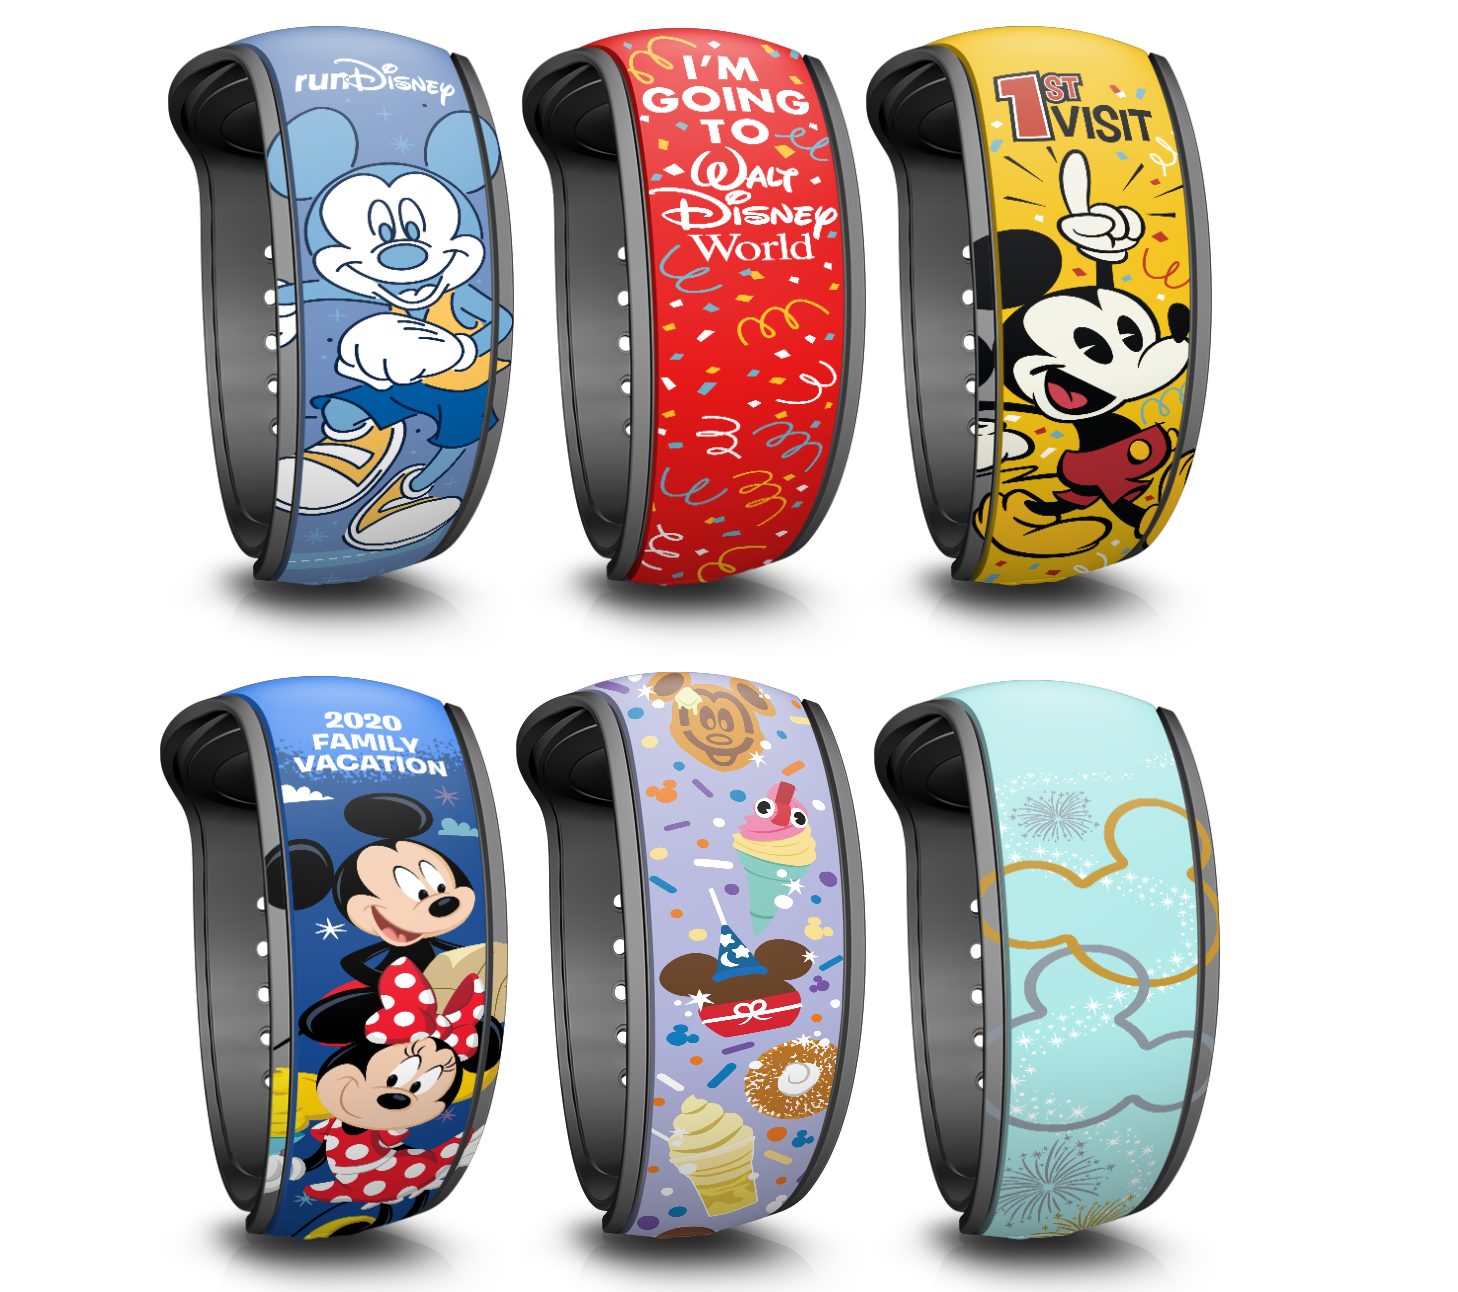 Six new MagicBand designs available as My Disney Experience exclusives Disney MagicBand